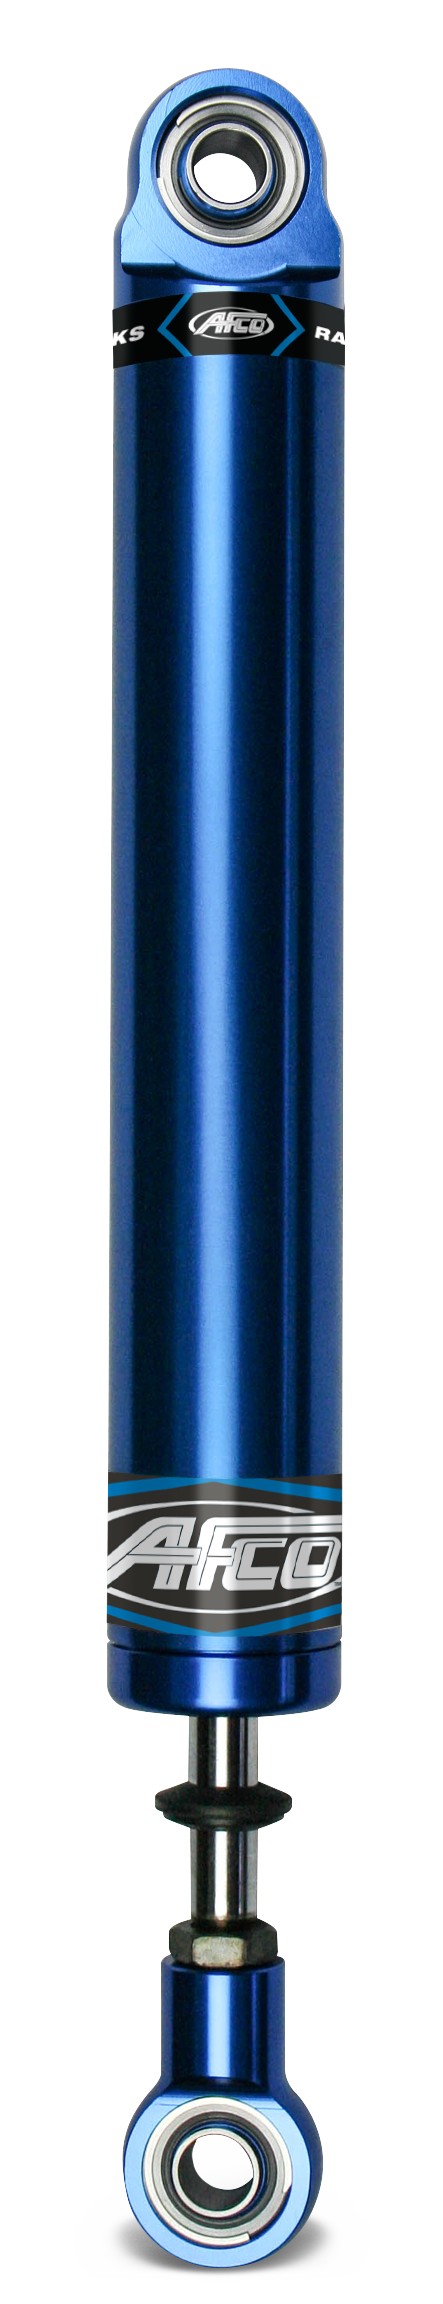 Aluminum Shock Twin Tube 16 Series Small Body 7 Inch Comp 2/Reb 5   